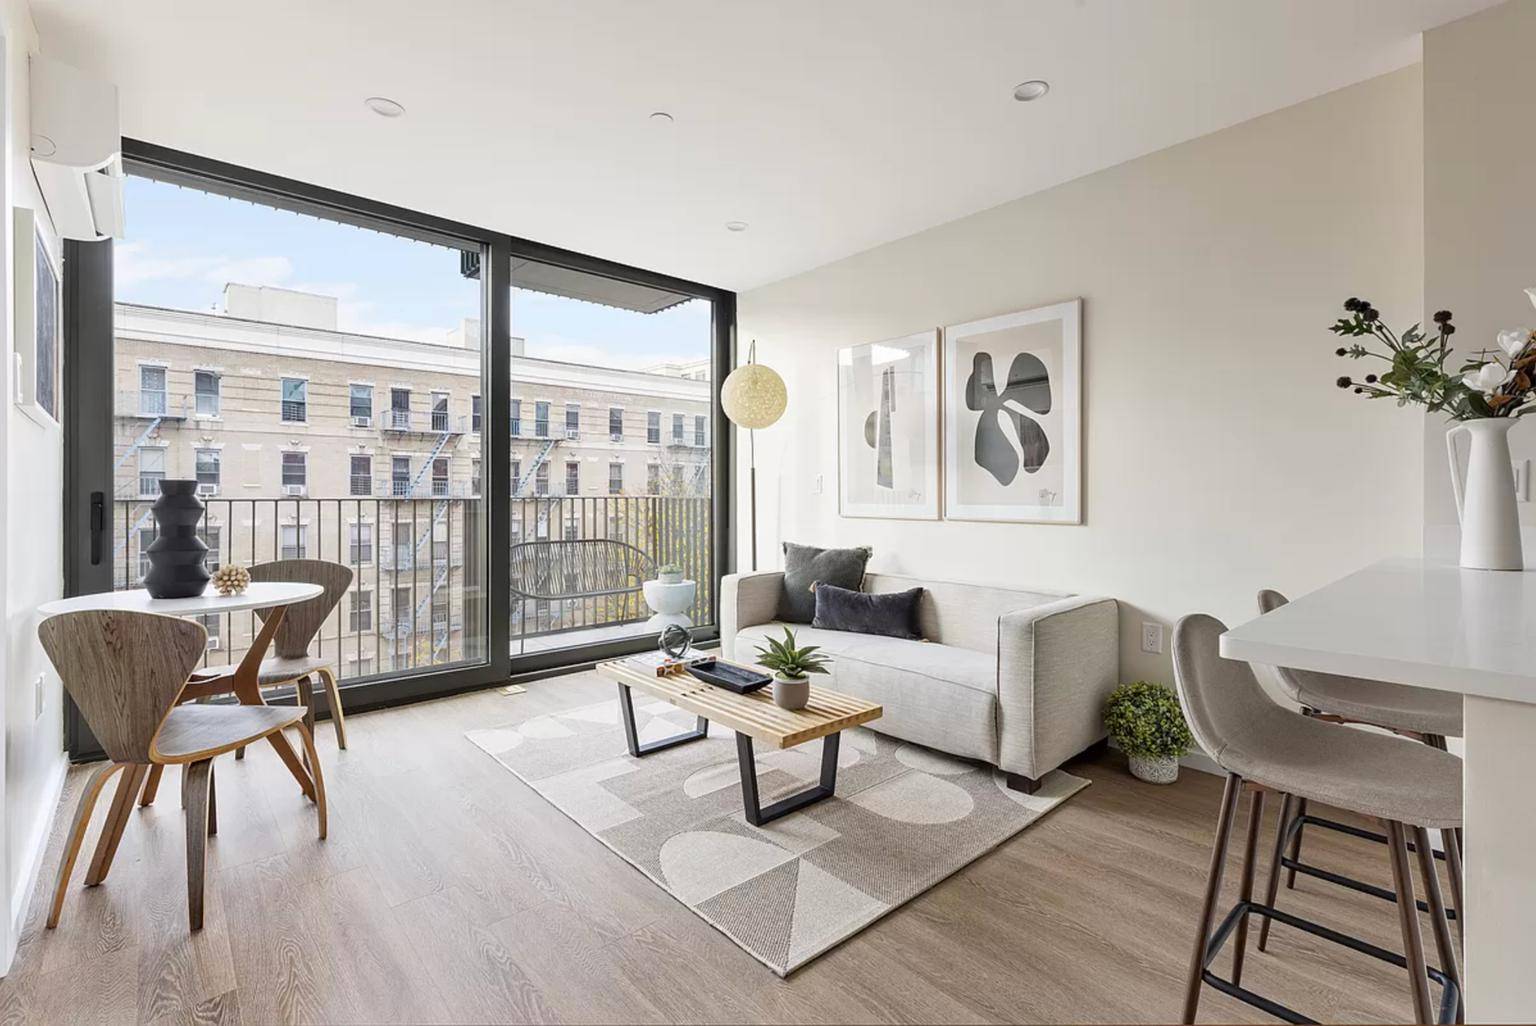 Park Row Brand New Luxury Rental 1 Bed 1 Bath Bedroom ResidenceEach unit offers immense natural light through oversized 8ft windows amp ; soaring 11ft ceilings !